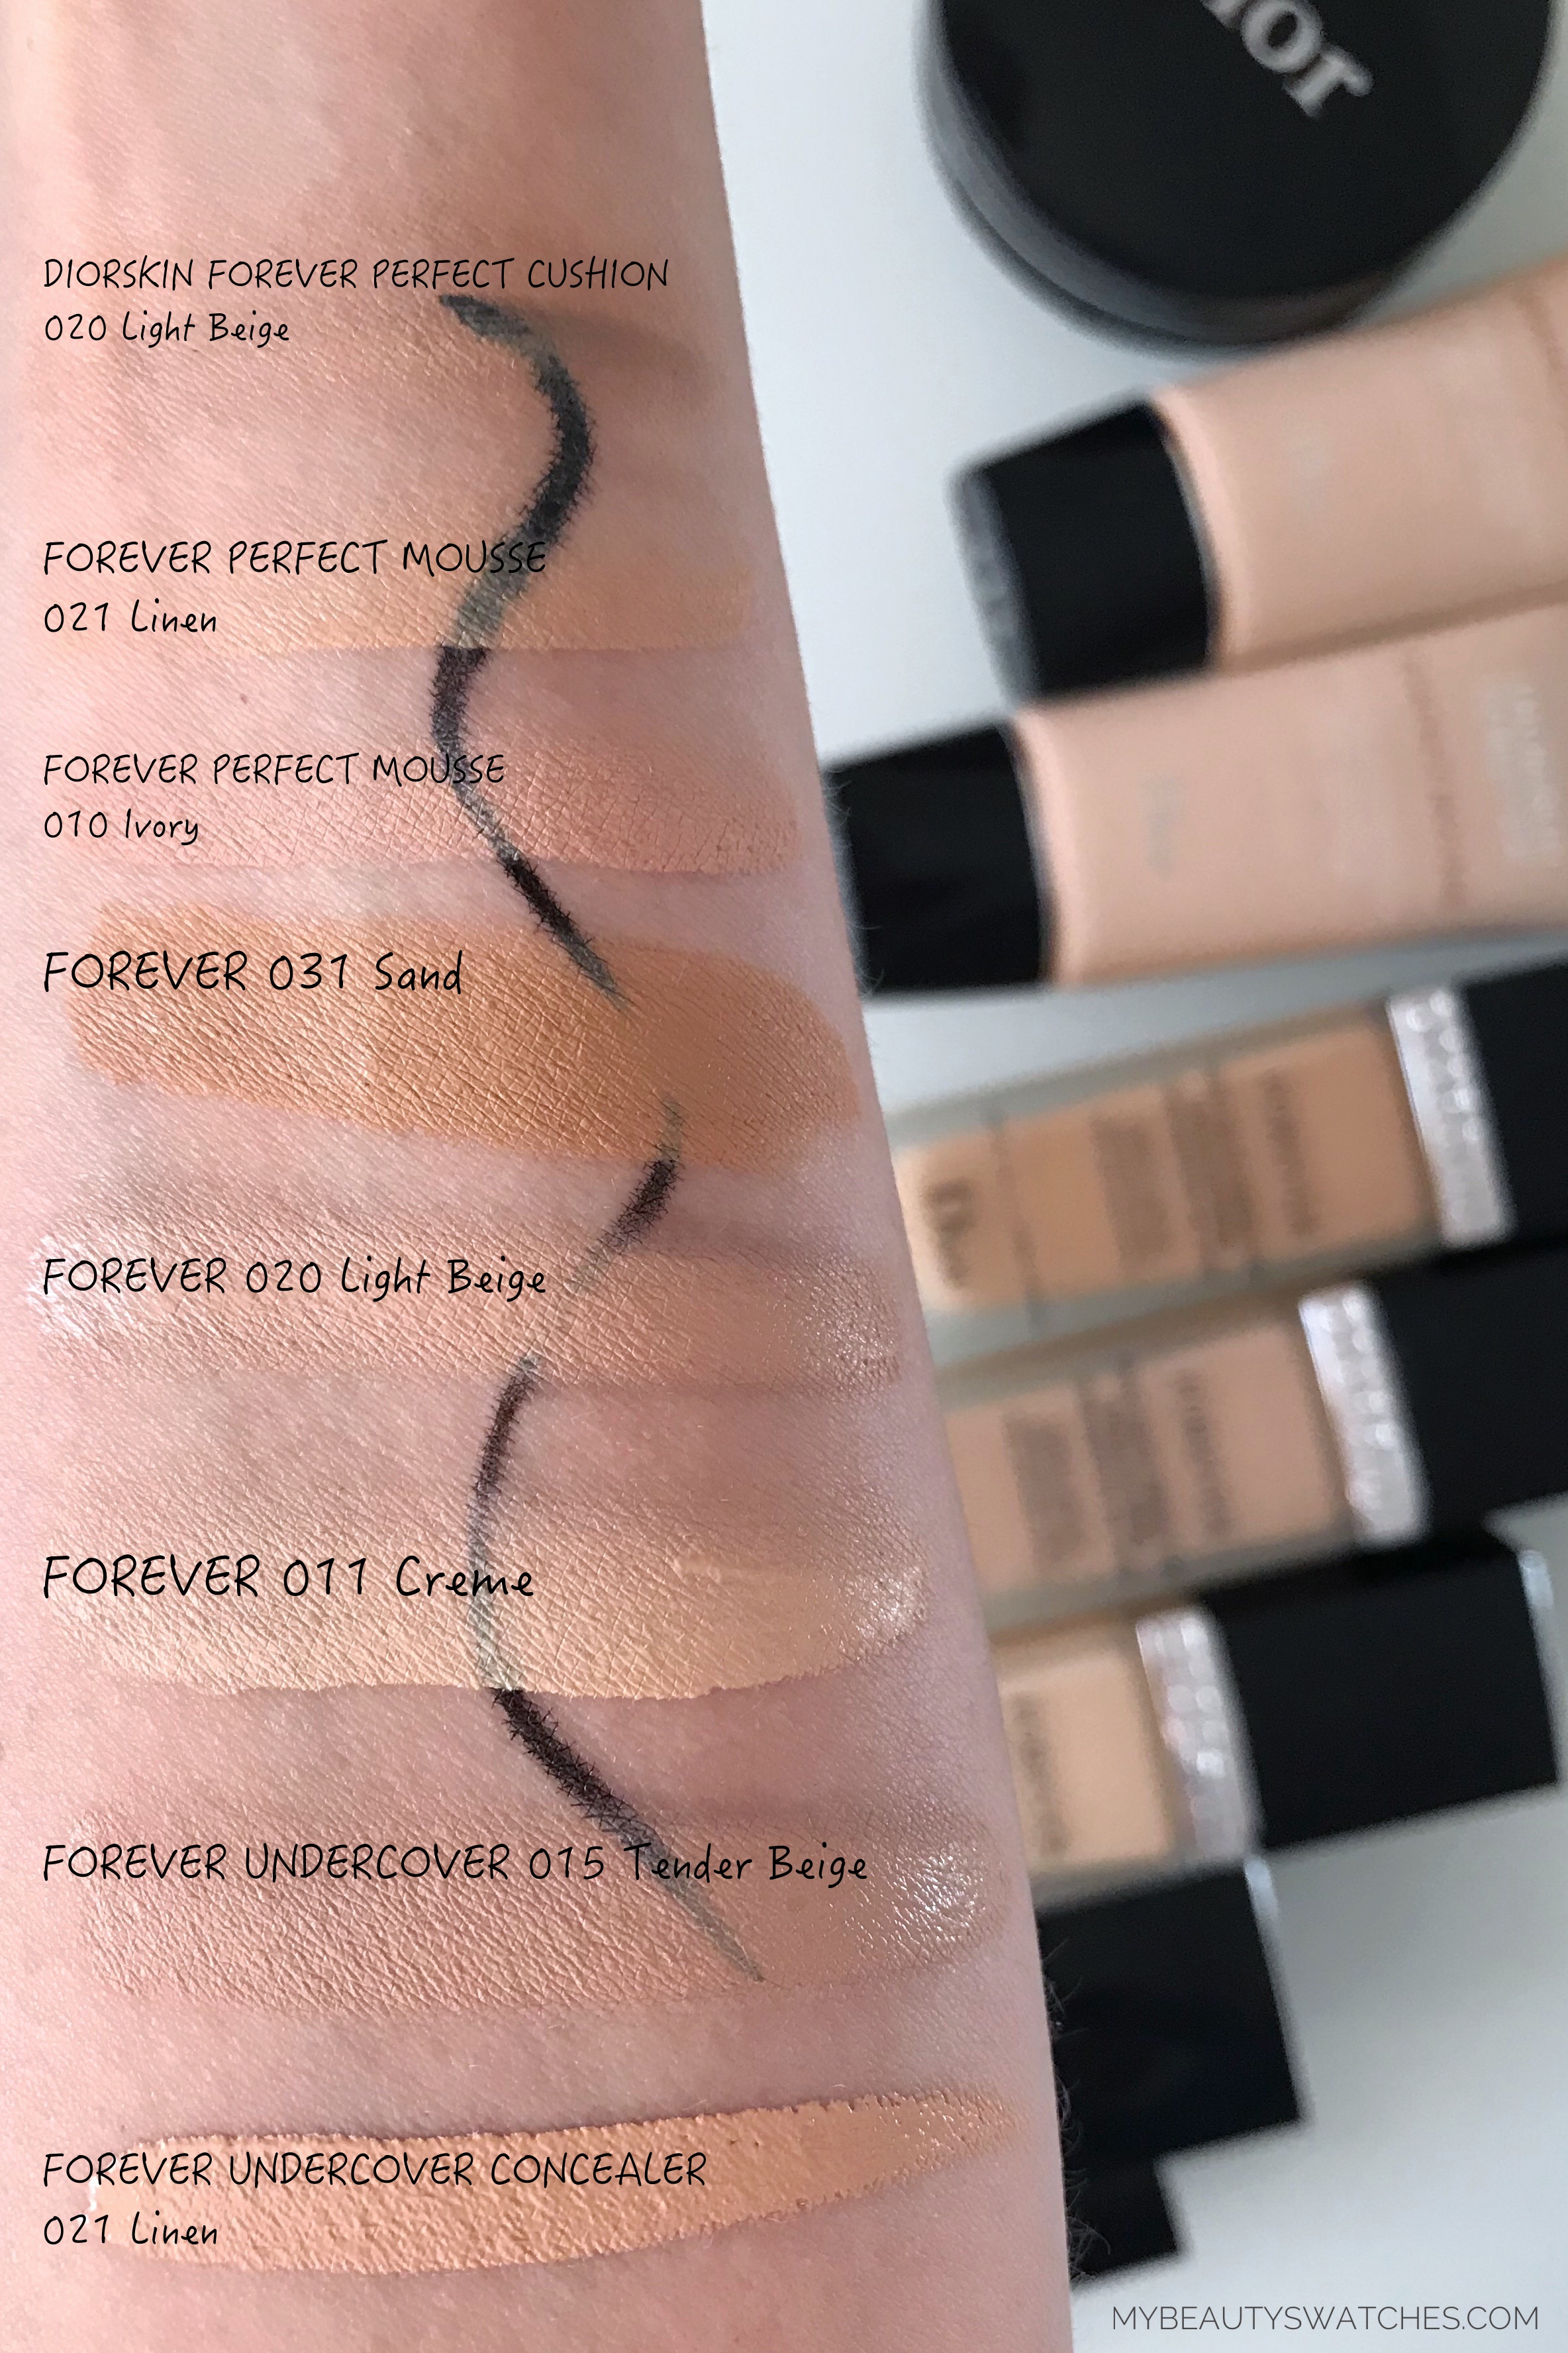 Dior 020 Light Beige Diorskin Forever Undercover Foundation Review   Swatches